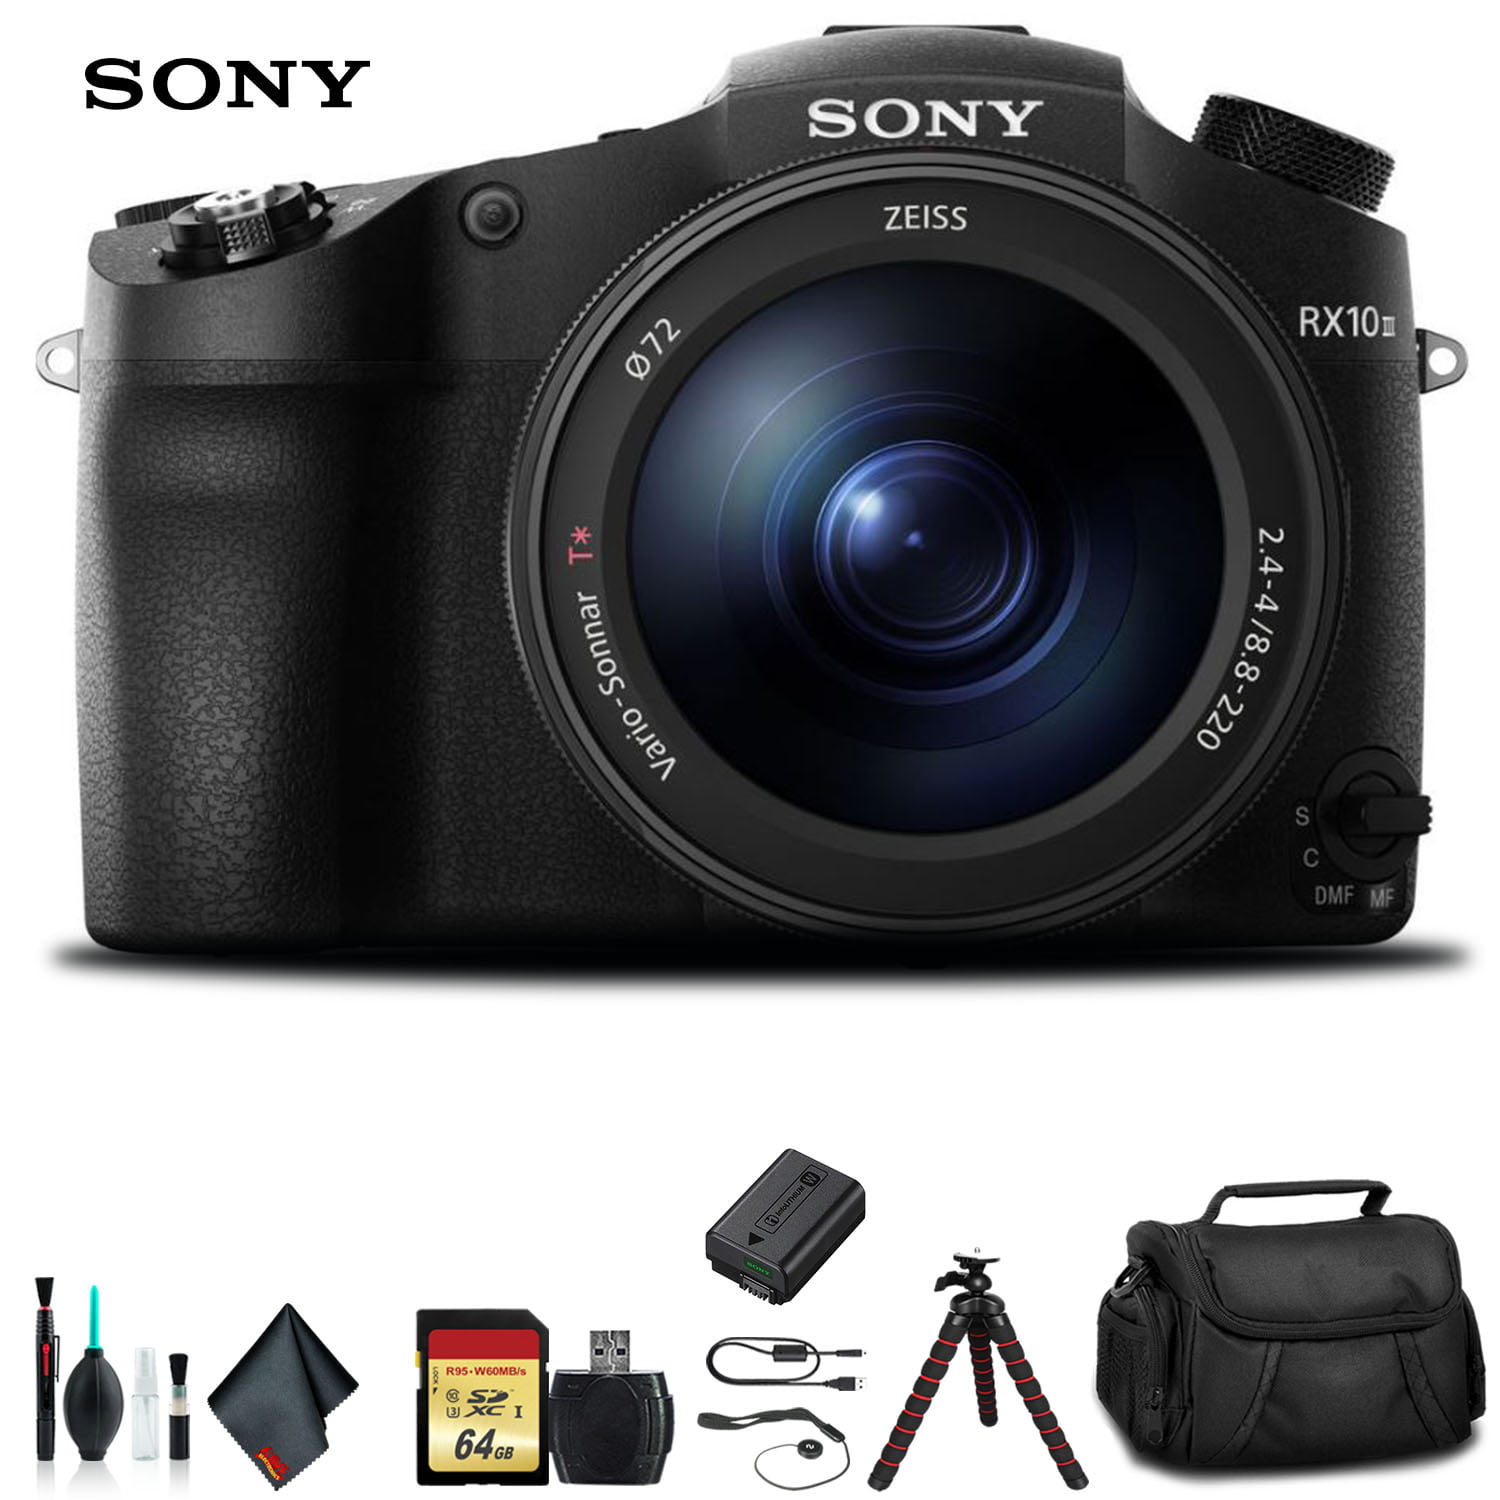 Sony Cyber-shot DSC-RX10 Camera Battery Cover Lid Door Replacement Repair Part 